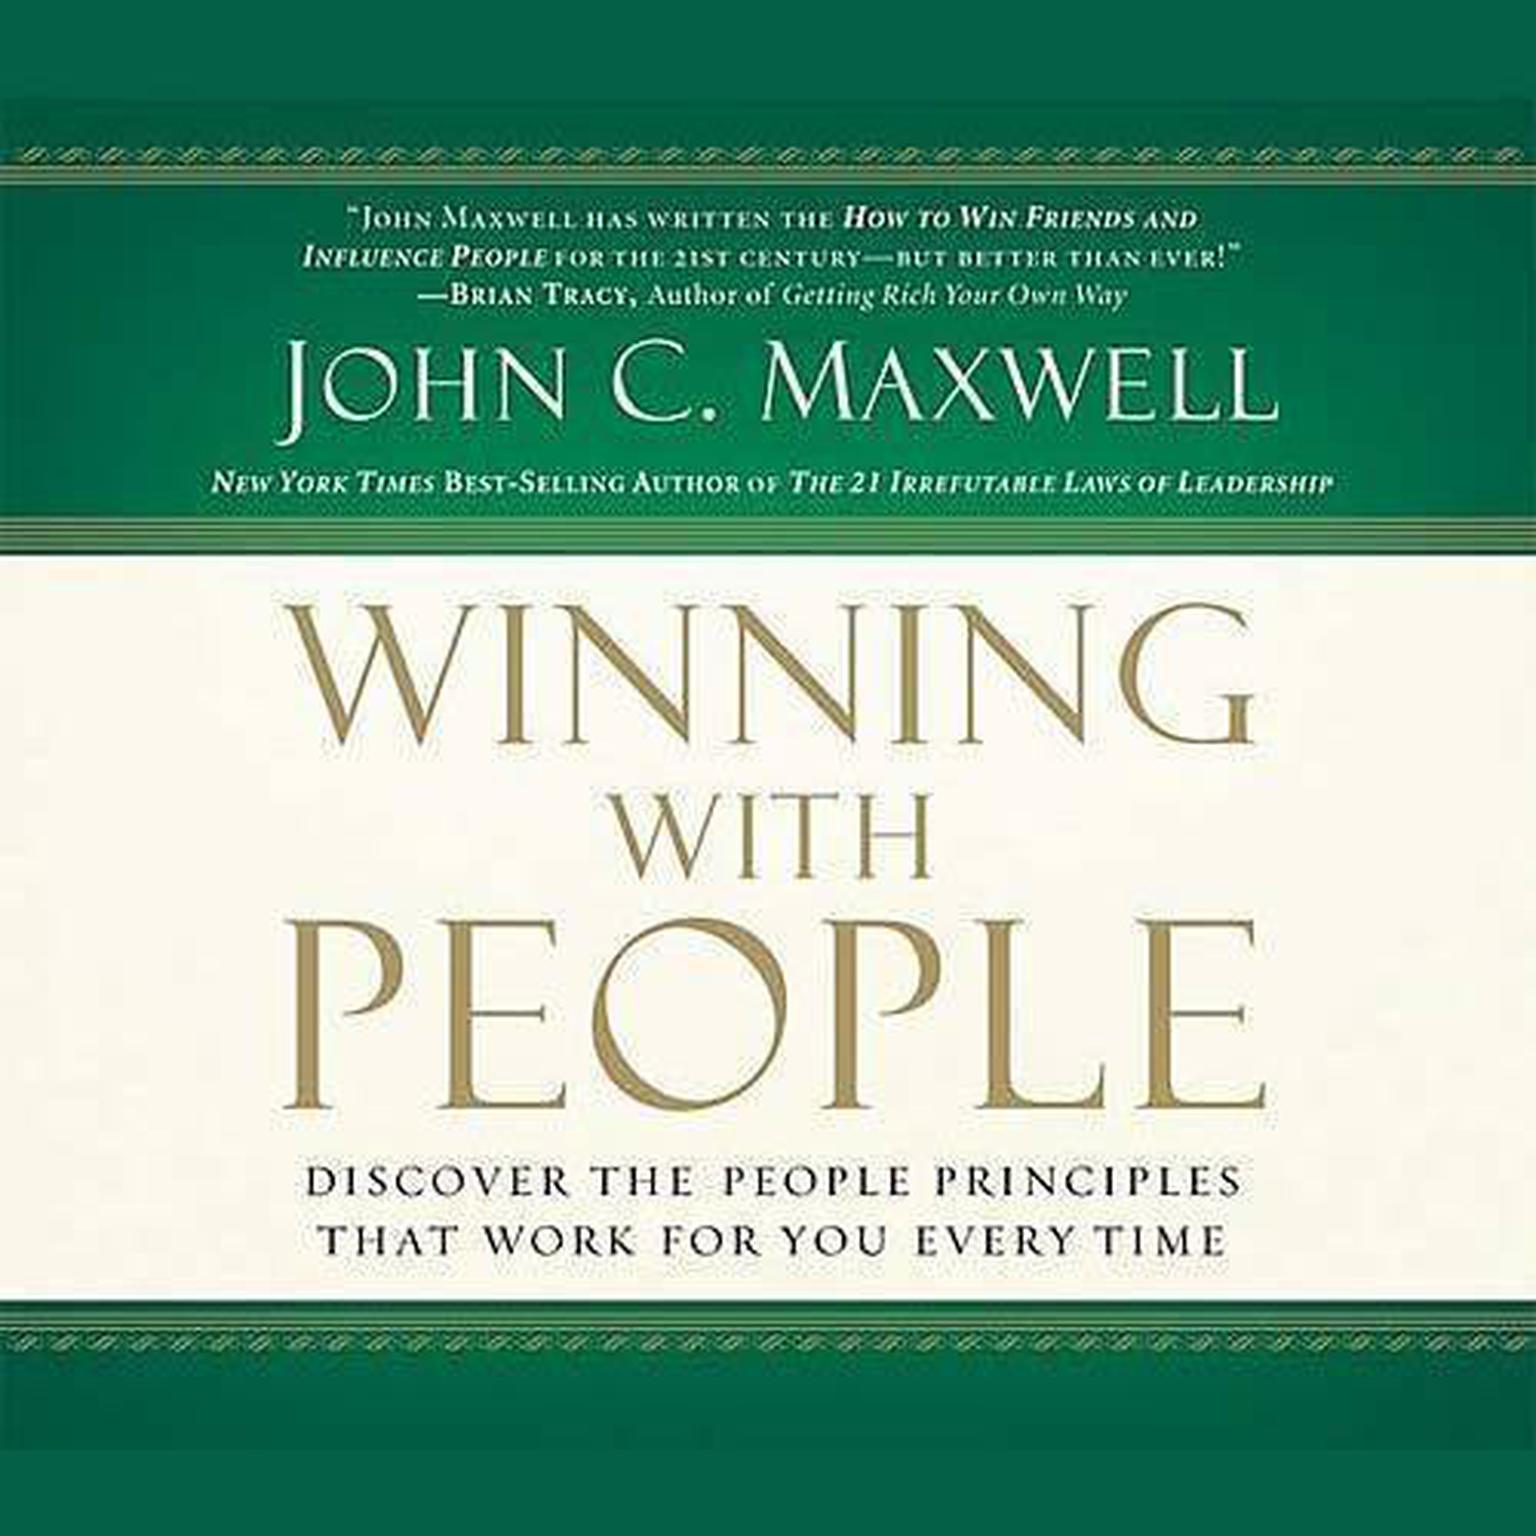 Winning with People (Abridged): Discover the People Principles That Work for You Every Time Audiobook, by John C. Maxwell